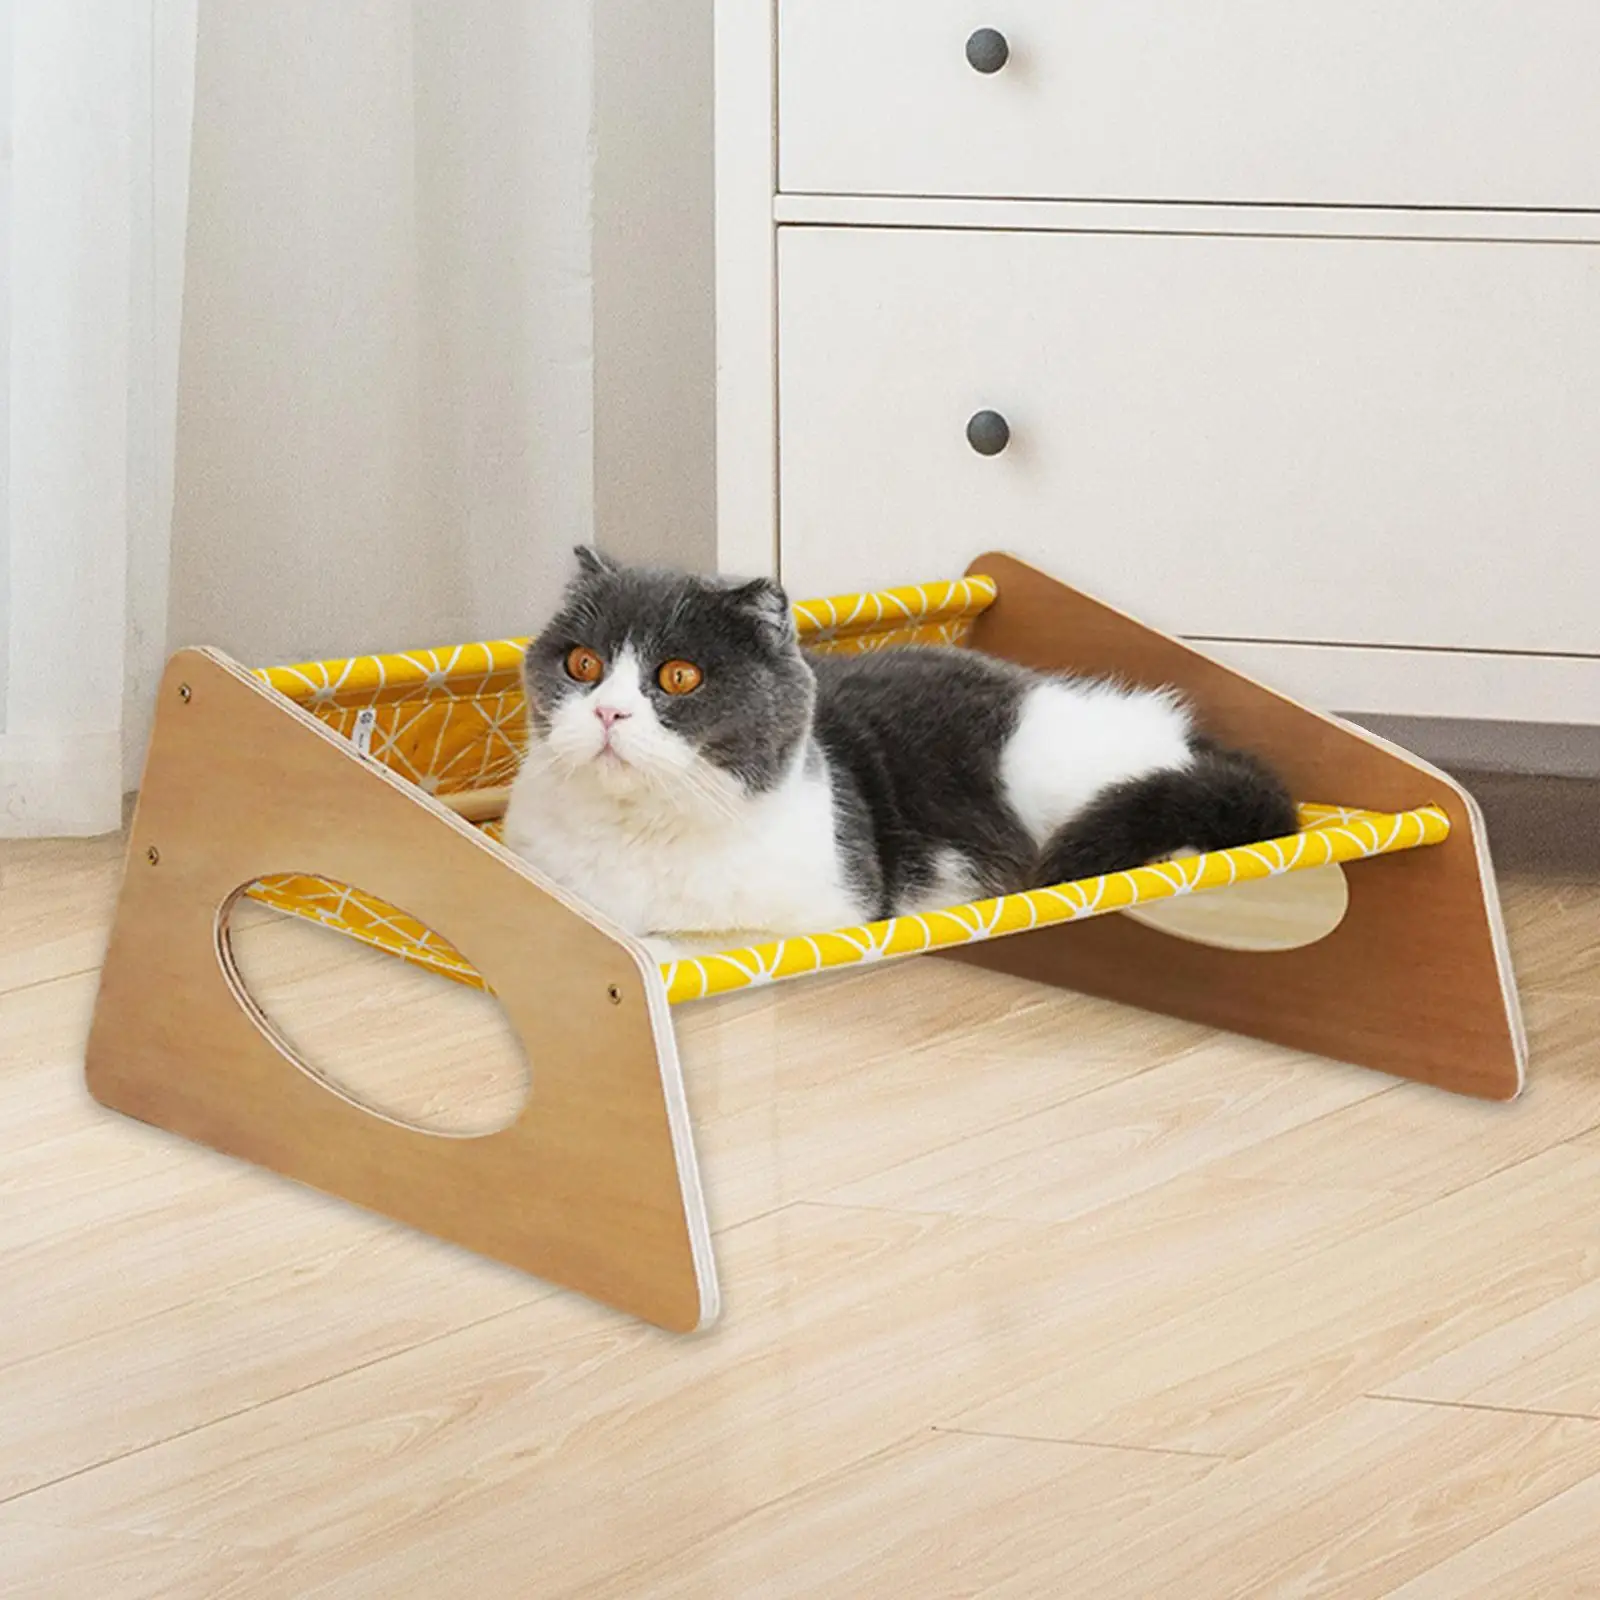 Cat Hammock Bed Breathable Cat Furniture Gift Elevated Cat Bed for Rabbit Bunny Kitten Small Animal Puppy Cats and Small Dogs